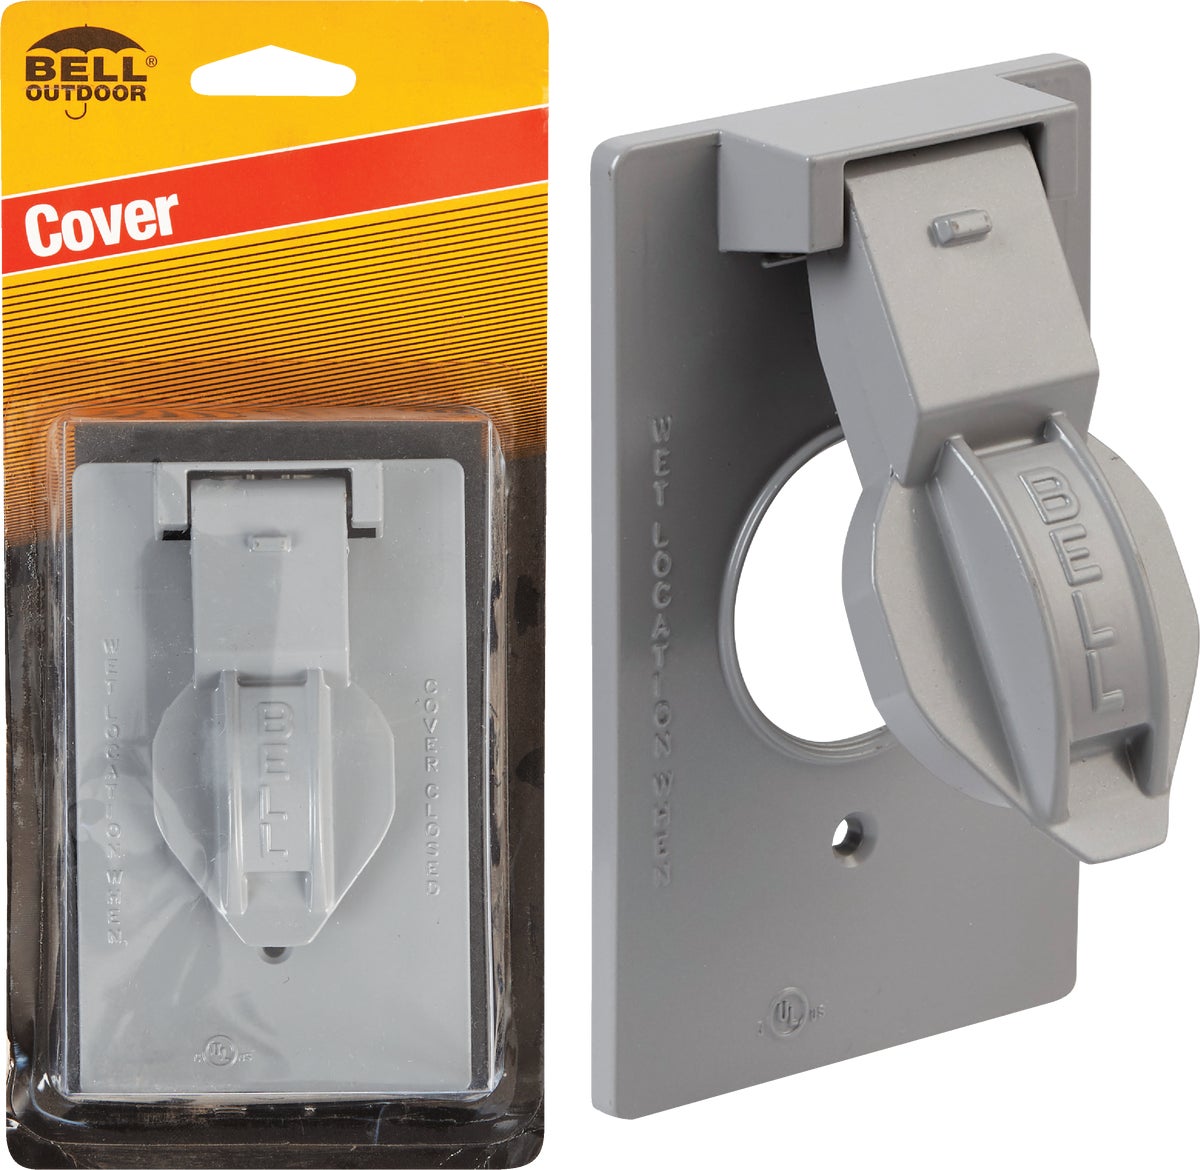 514081 5155-5 Bell GRAY Single Receptacle Weatherproof Outdoor Outlet Cover 